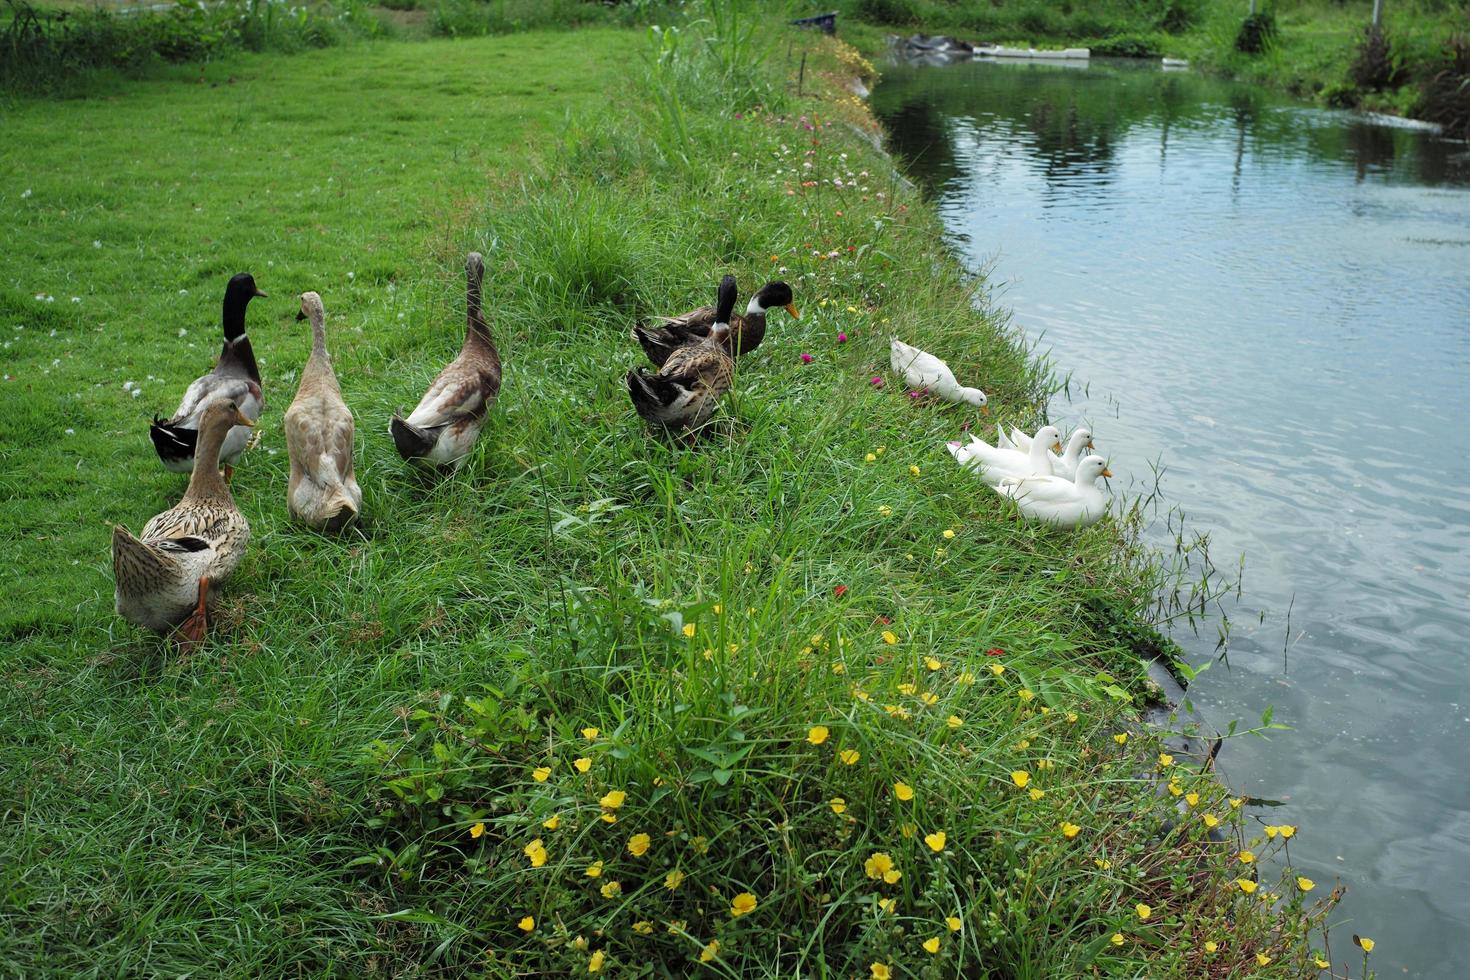 Group of ducks and geese walking in the field photo